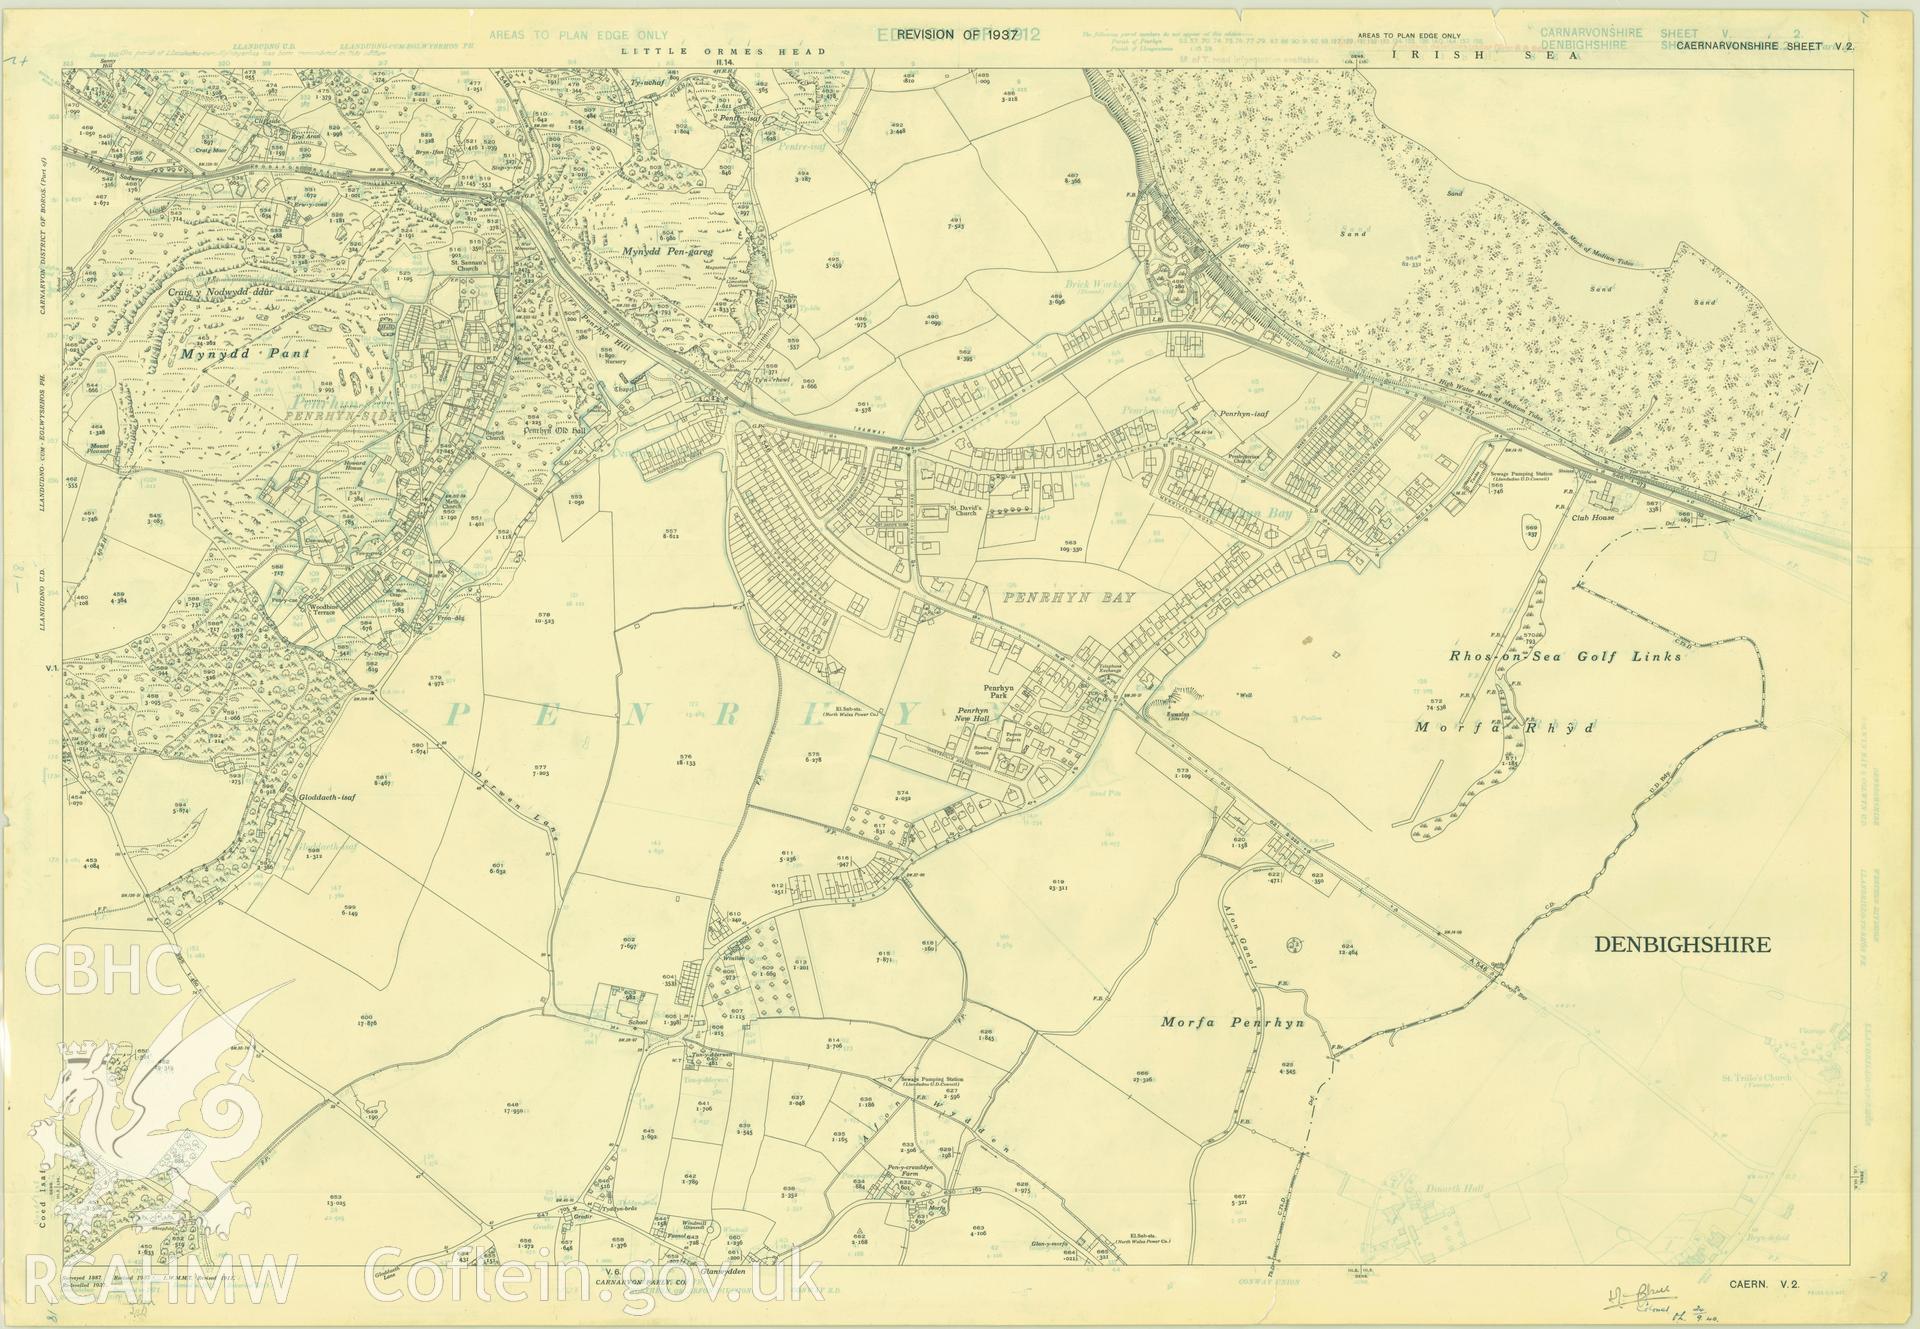 Digitized copy of Ordnance Survey 25 inch coloured map of 1937 showing area within Caernarvonshire